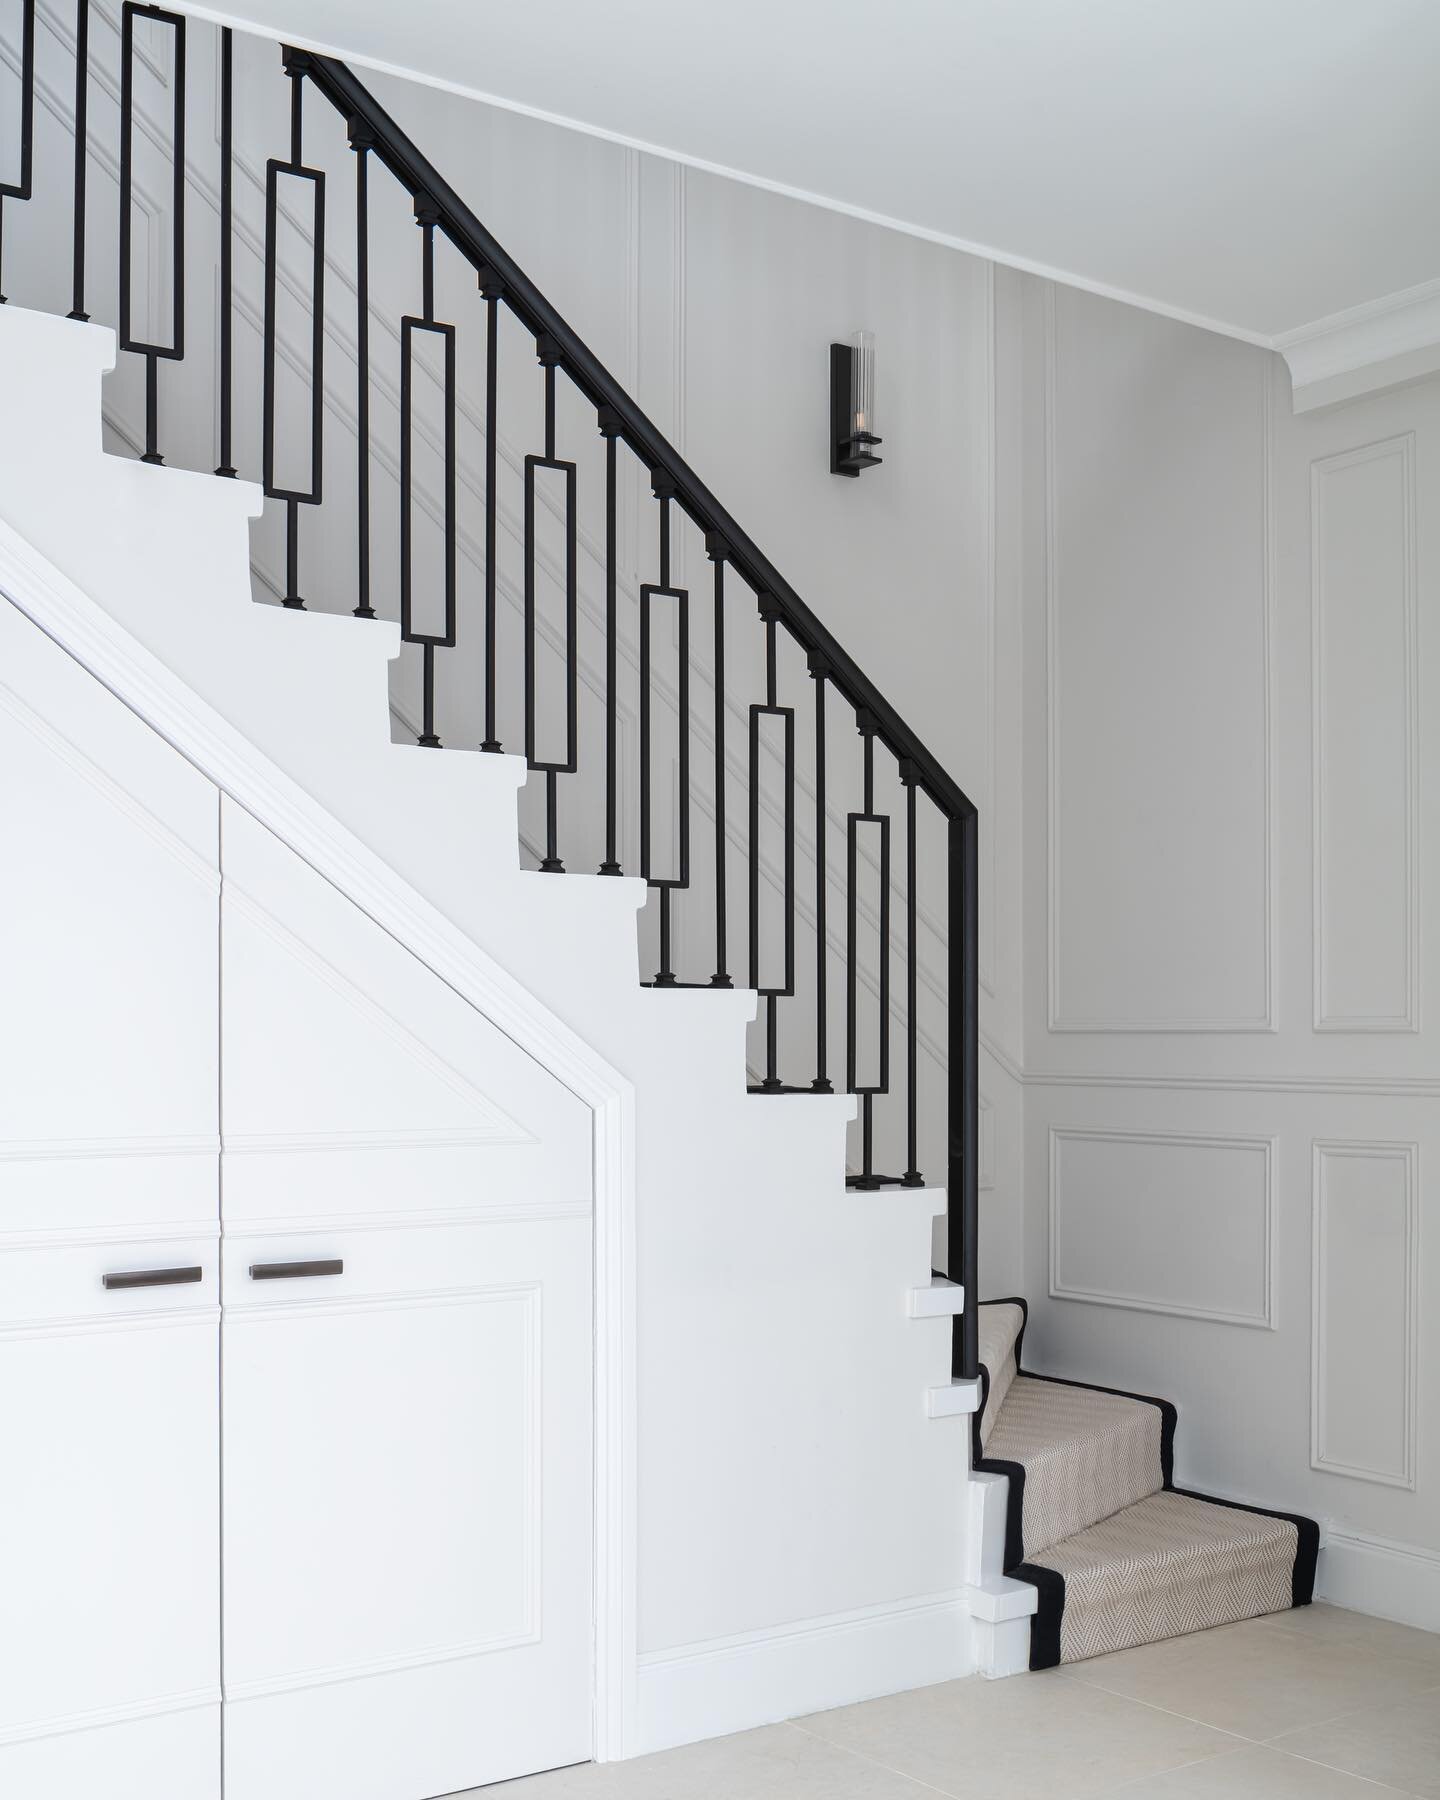 Staircase to heaven 🥰&hellip;well almost!! 
Our client wanted a bespoke staircase from the existing structure which was made out of stone. With lots of planning and some great carpentry, clever purchasing and a classic runner from @hartleytissier &h